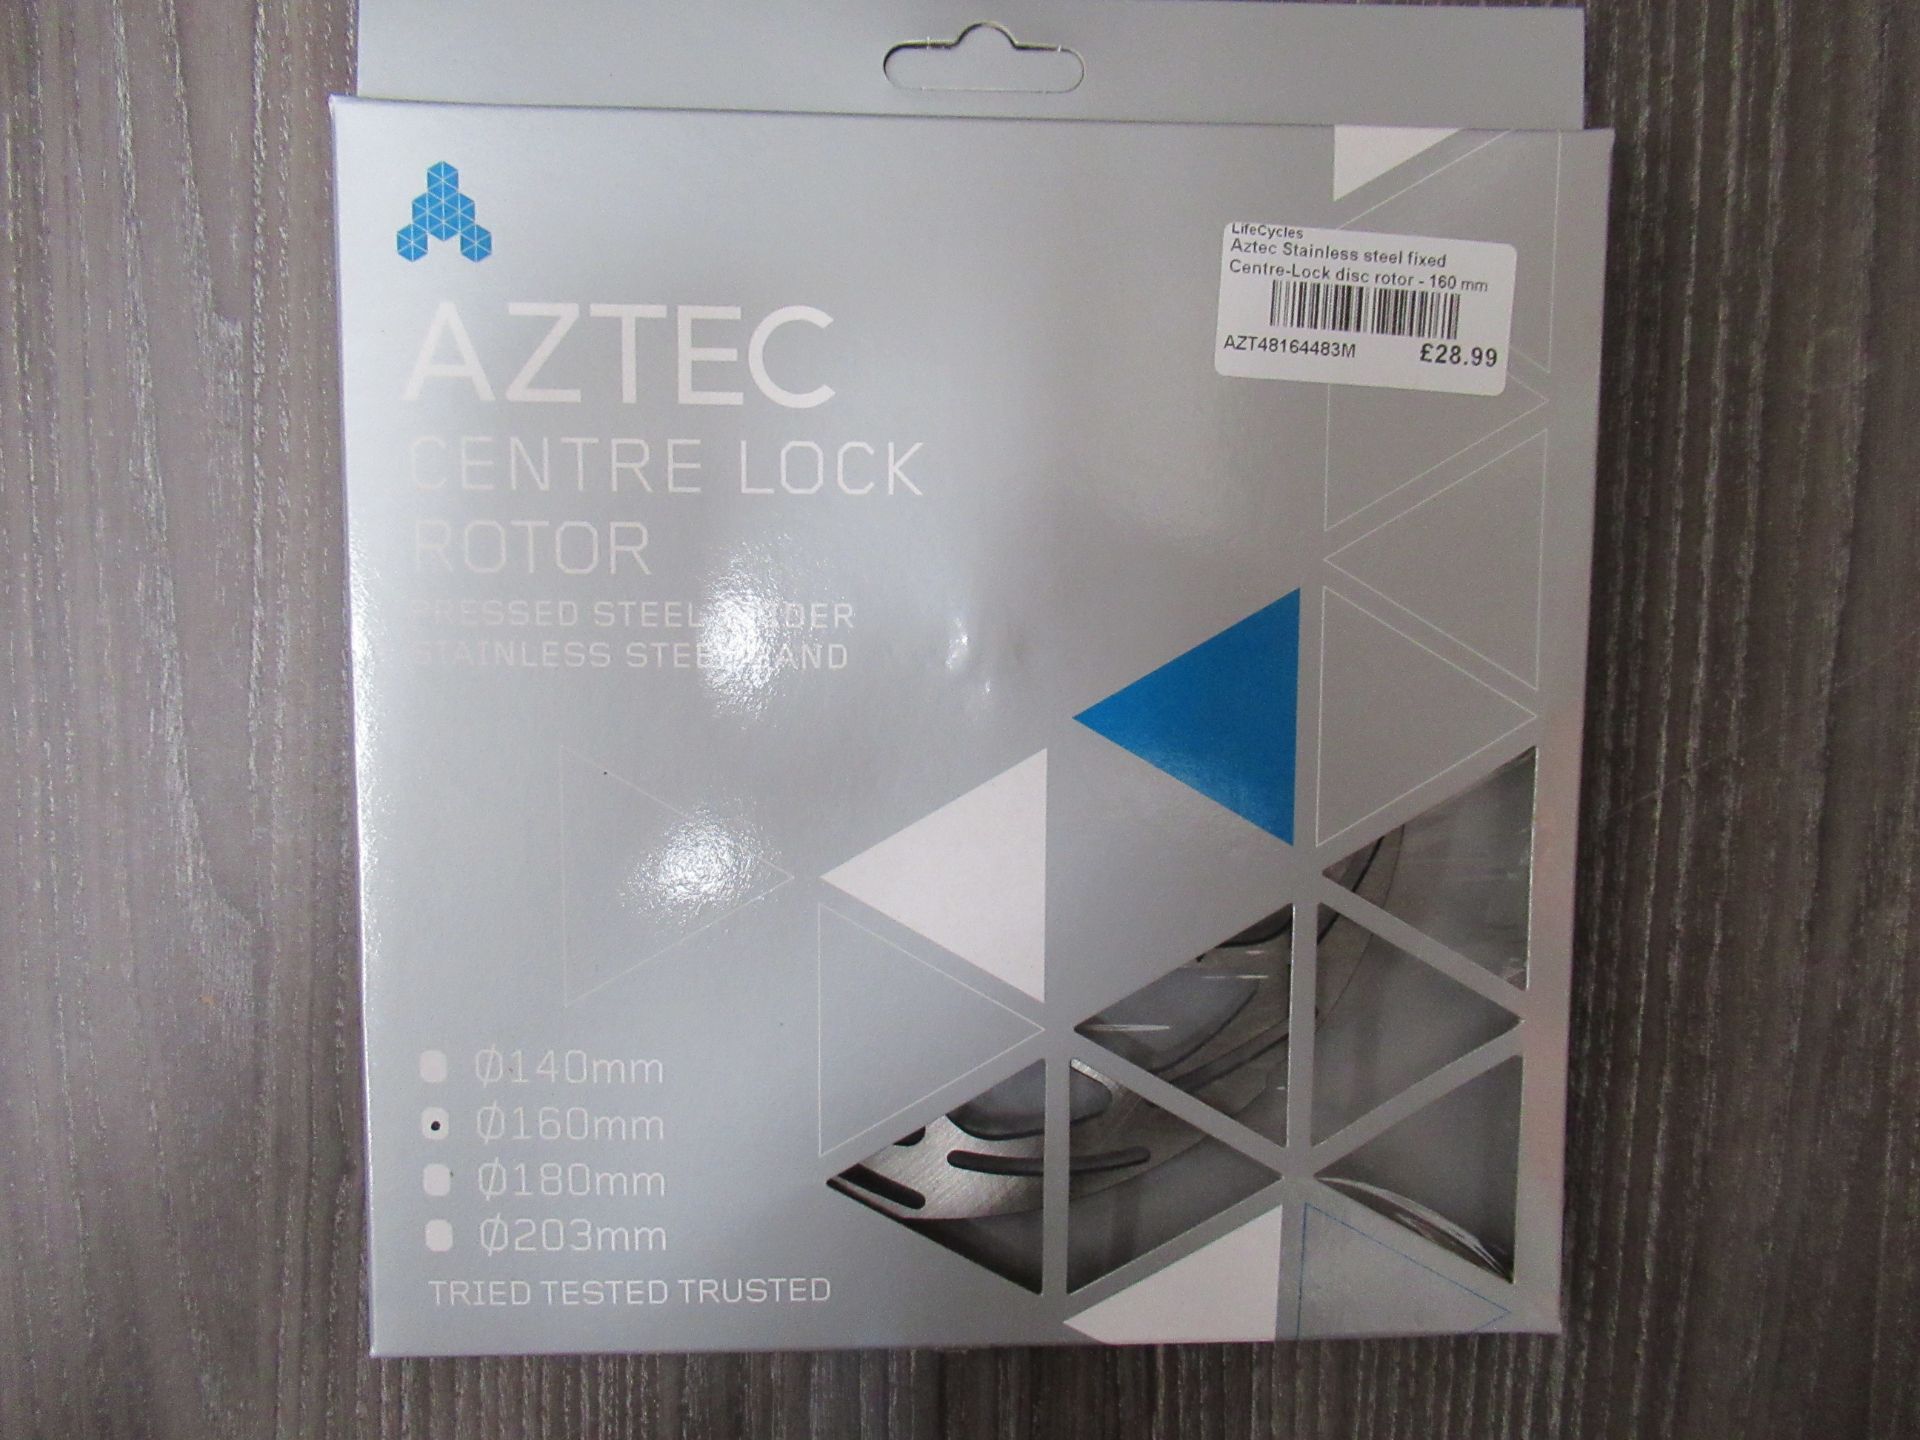 6 x Aztec Centre Lock Rotor's: 2 x 160mm (RRP£28.99 each); 3 x 180mm (RRP£32.99) and 1 x 203mm (RRP£ - Image 12 of 13